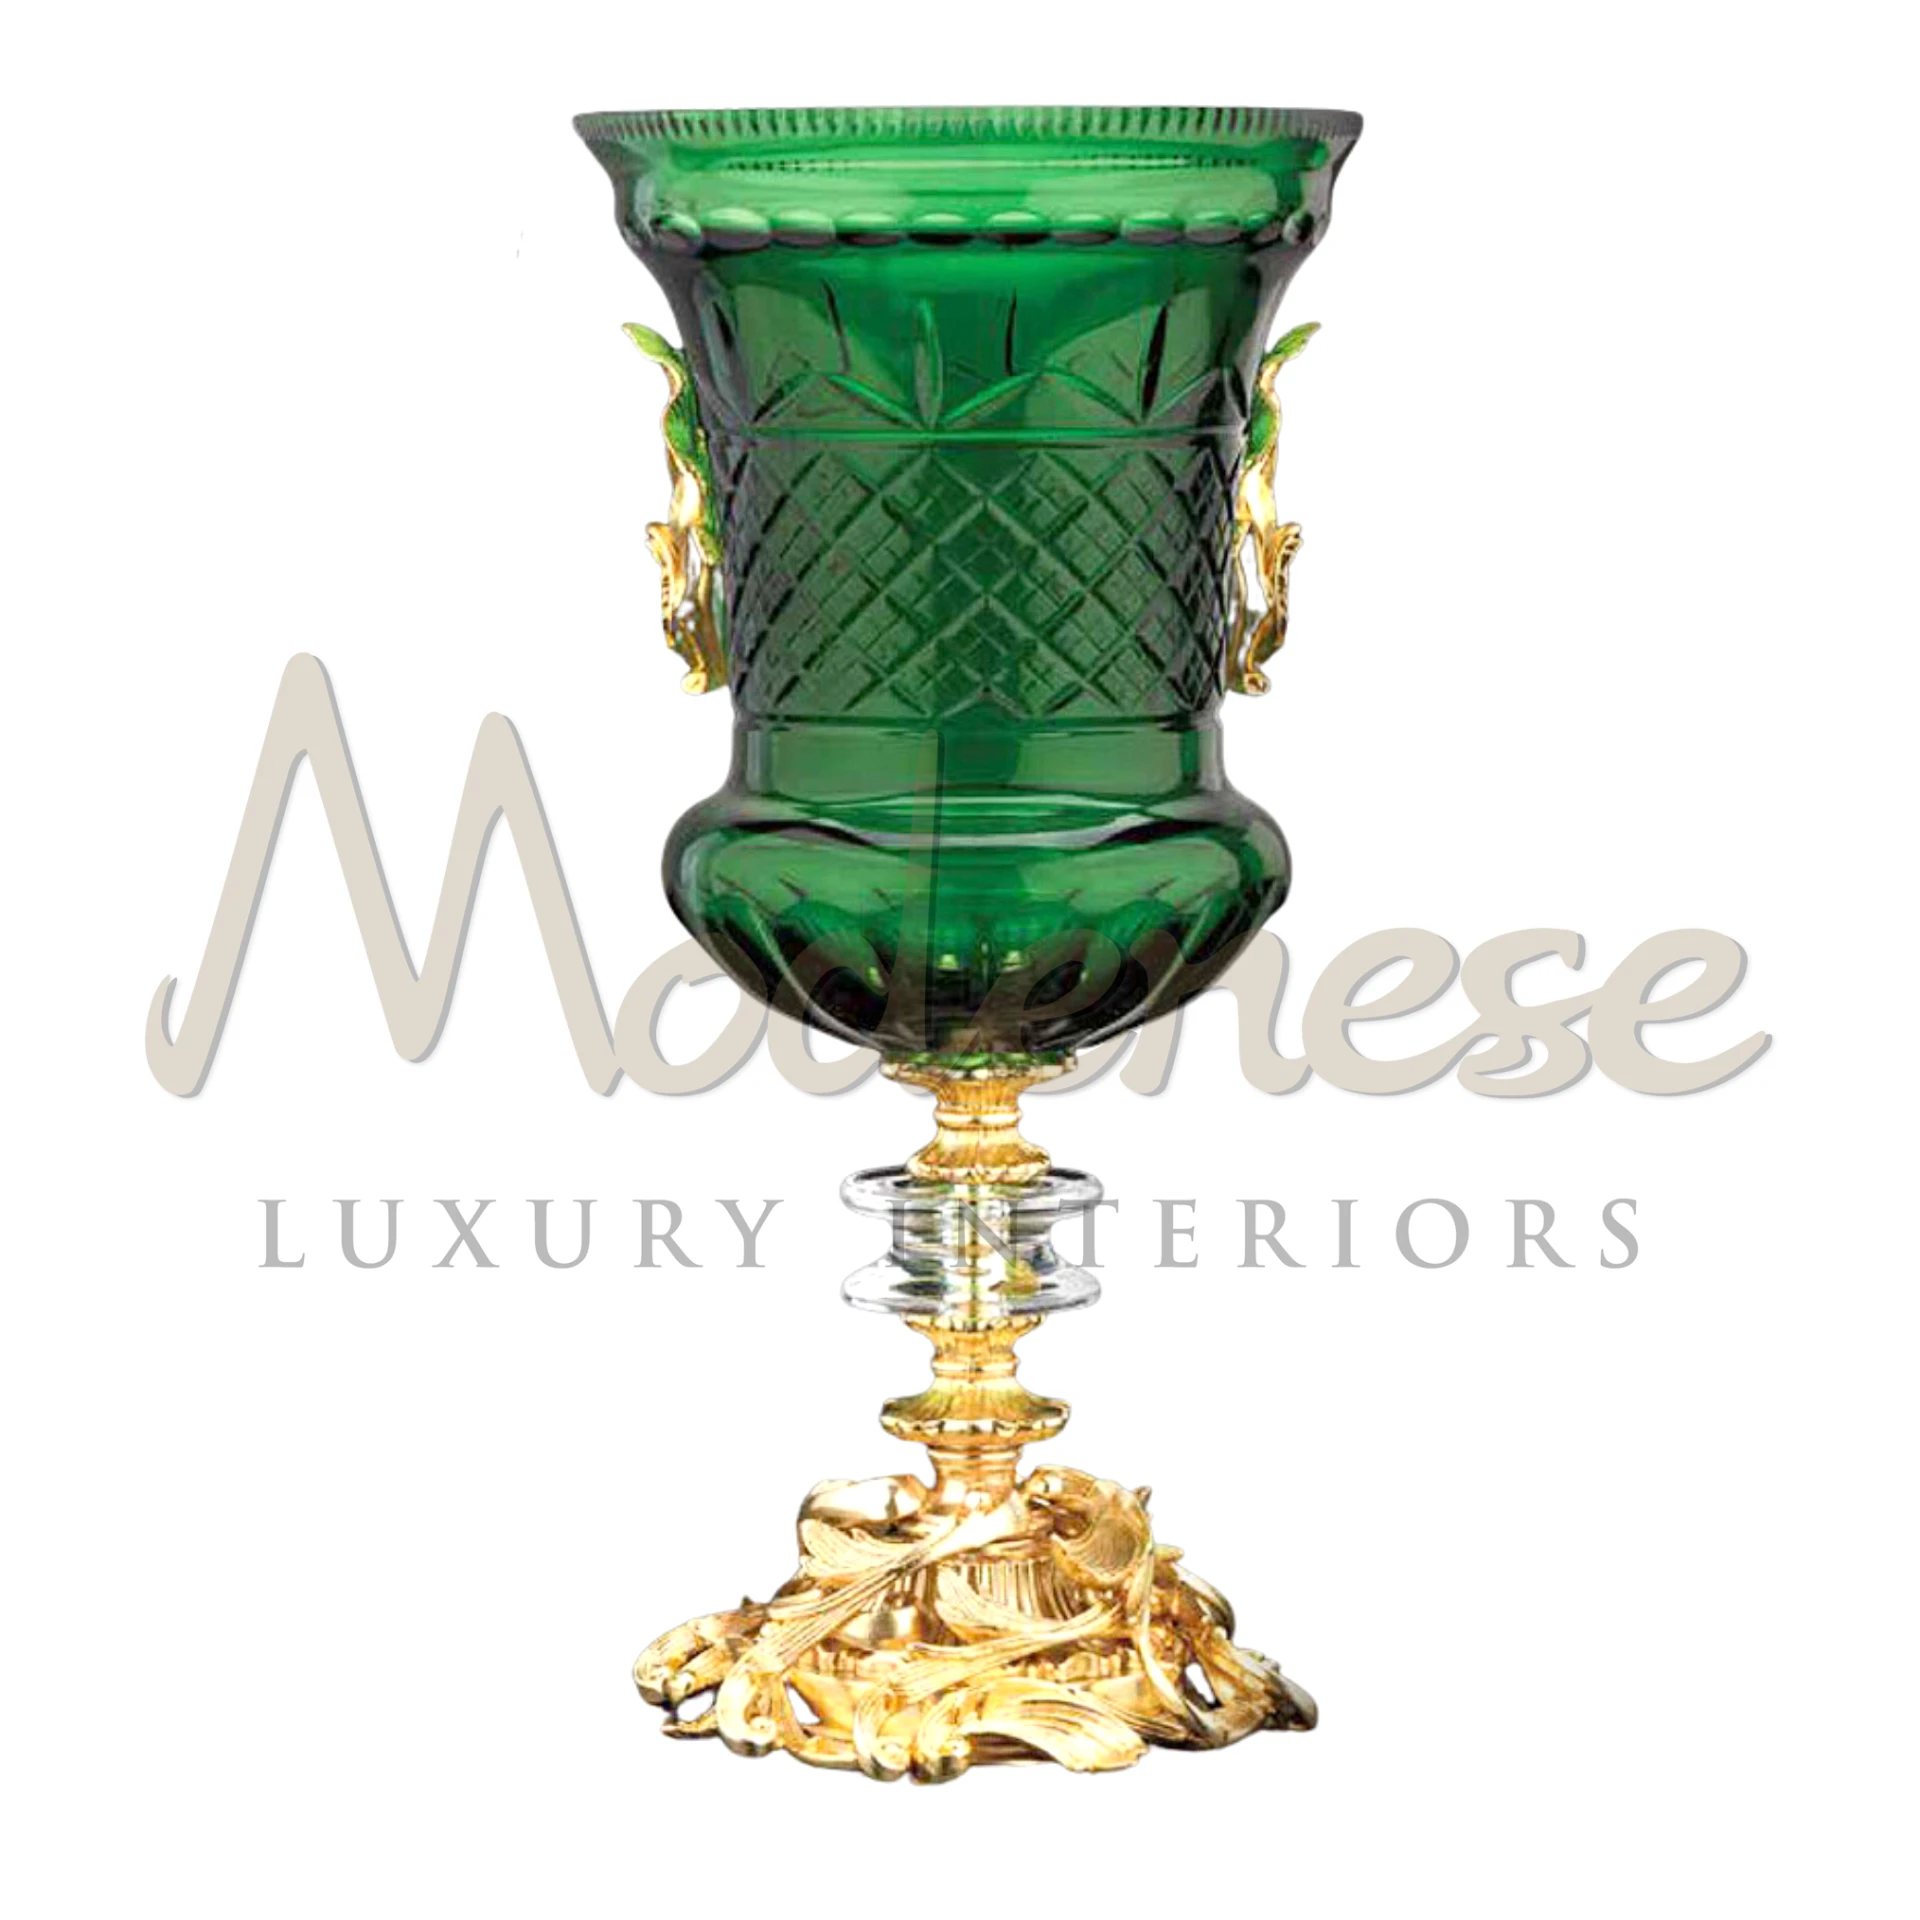 High-end Luxury Emerald Tall Vase in polished glass or crystal, perfect for sophisticated interior design, blending classic and Baroque elegance.
